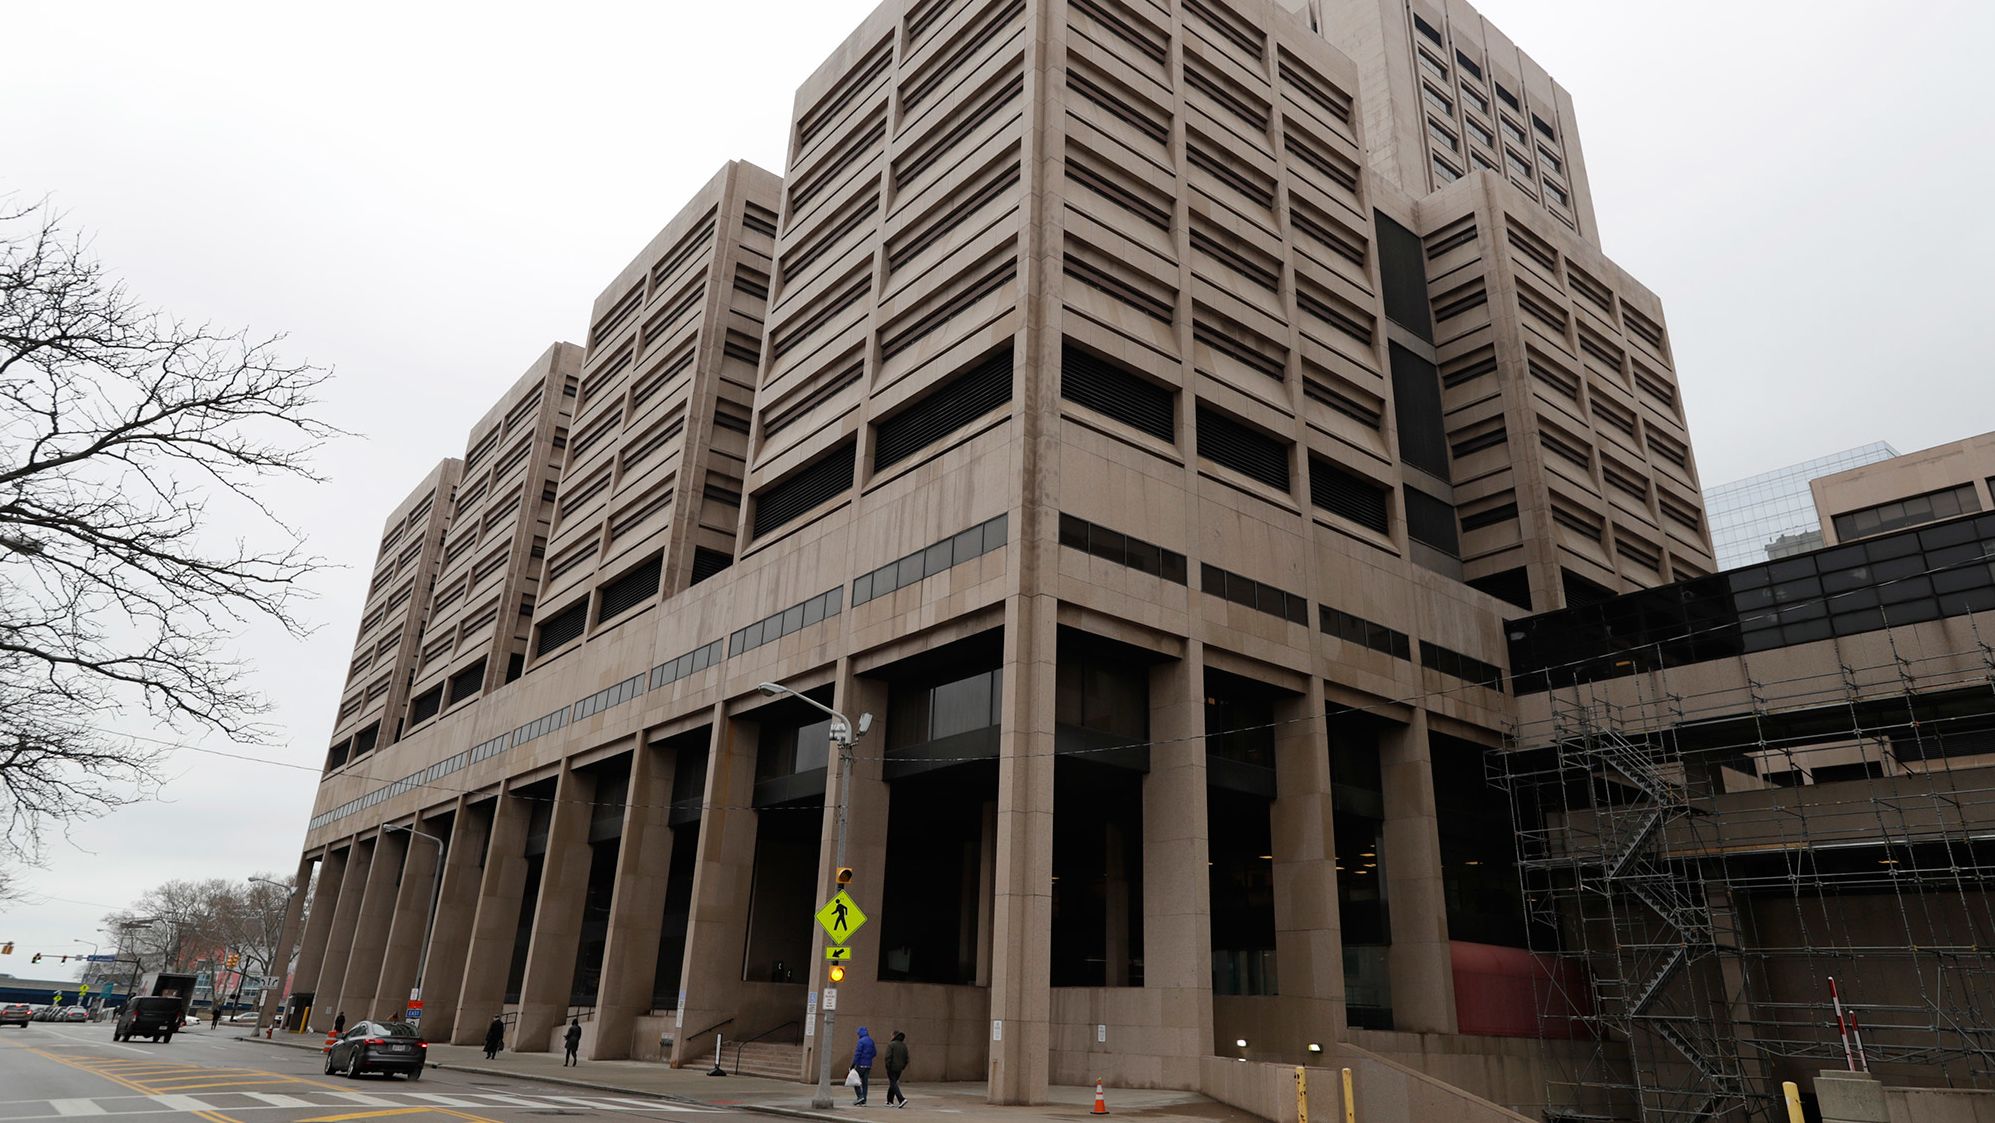 Inmates have been released from Cuyahoga County Jail over coronavirus concerns.